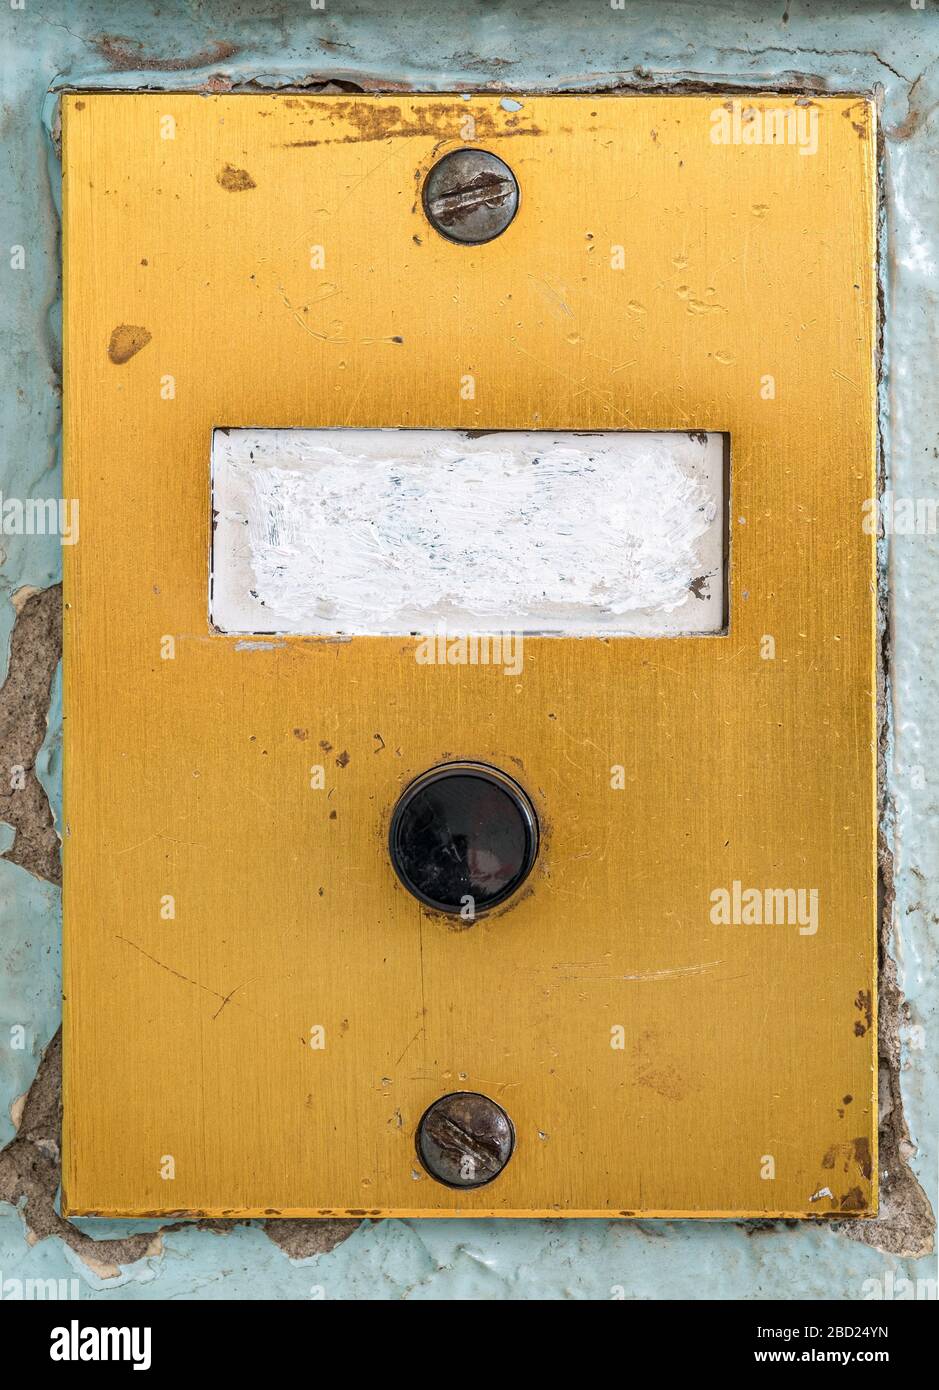 old doorbell plate with blank erased label Stock Photo